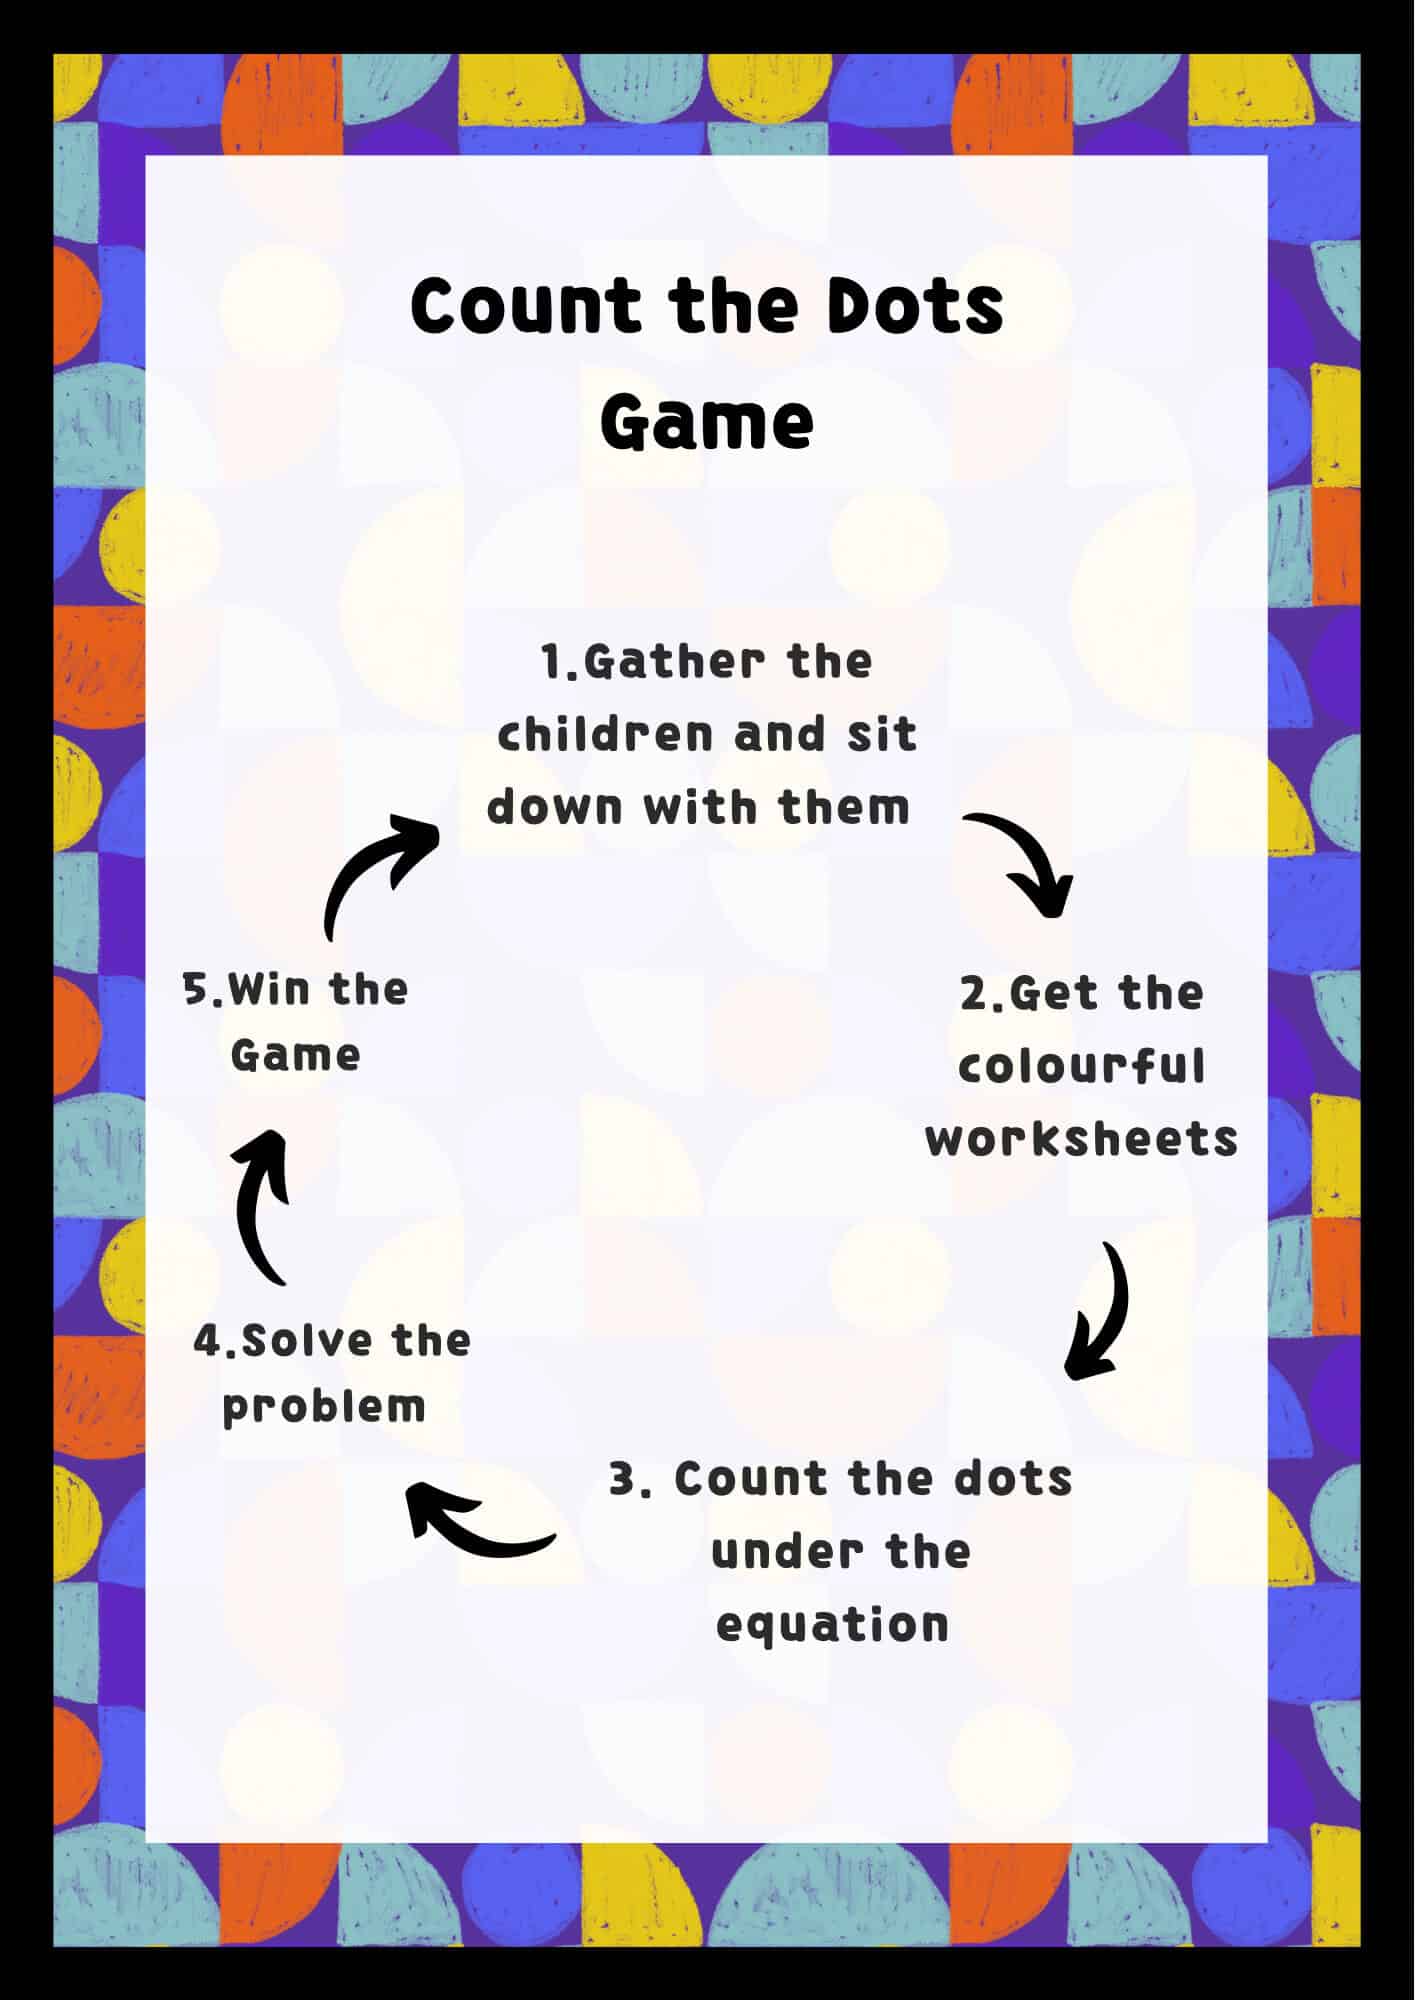 steps of count the dots game